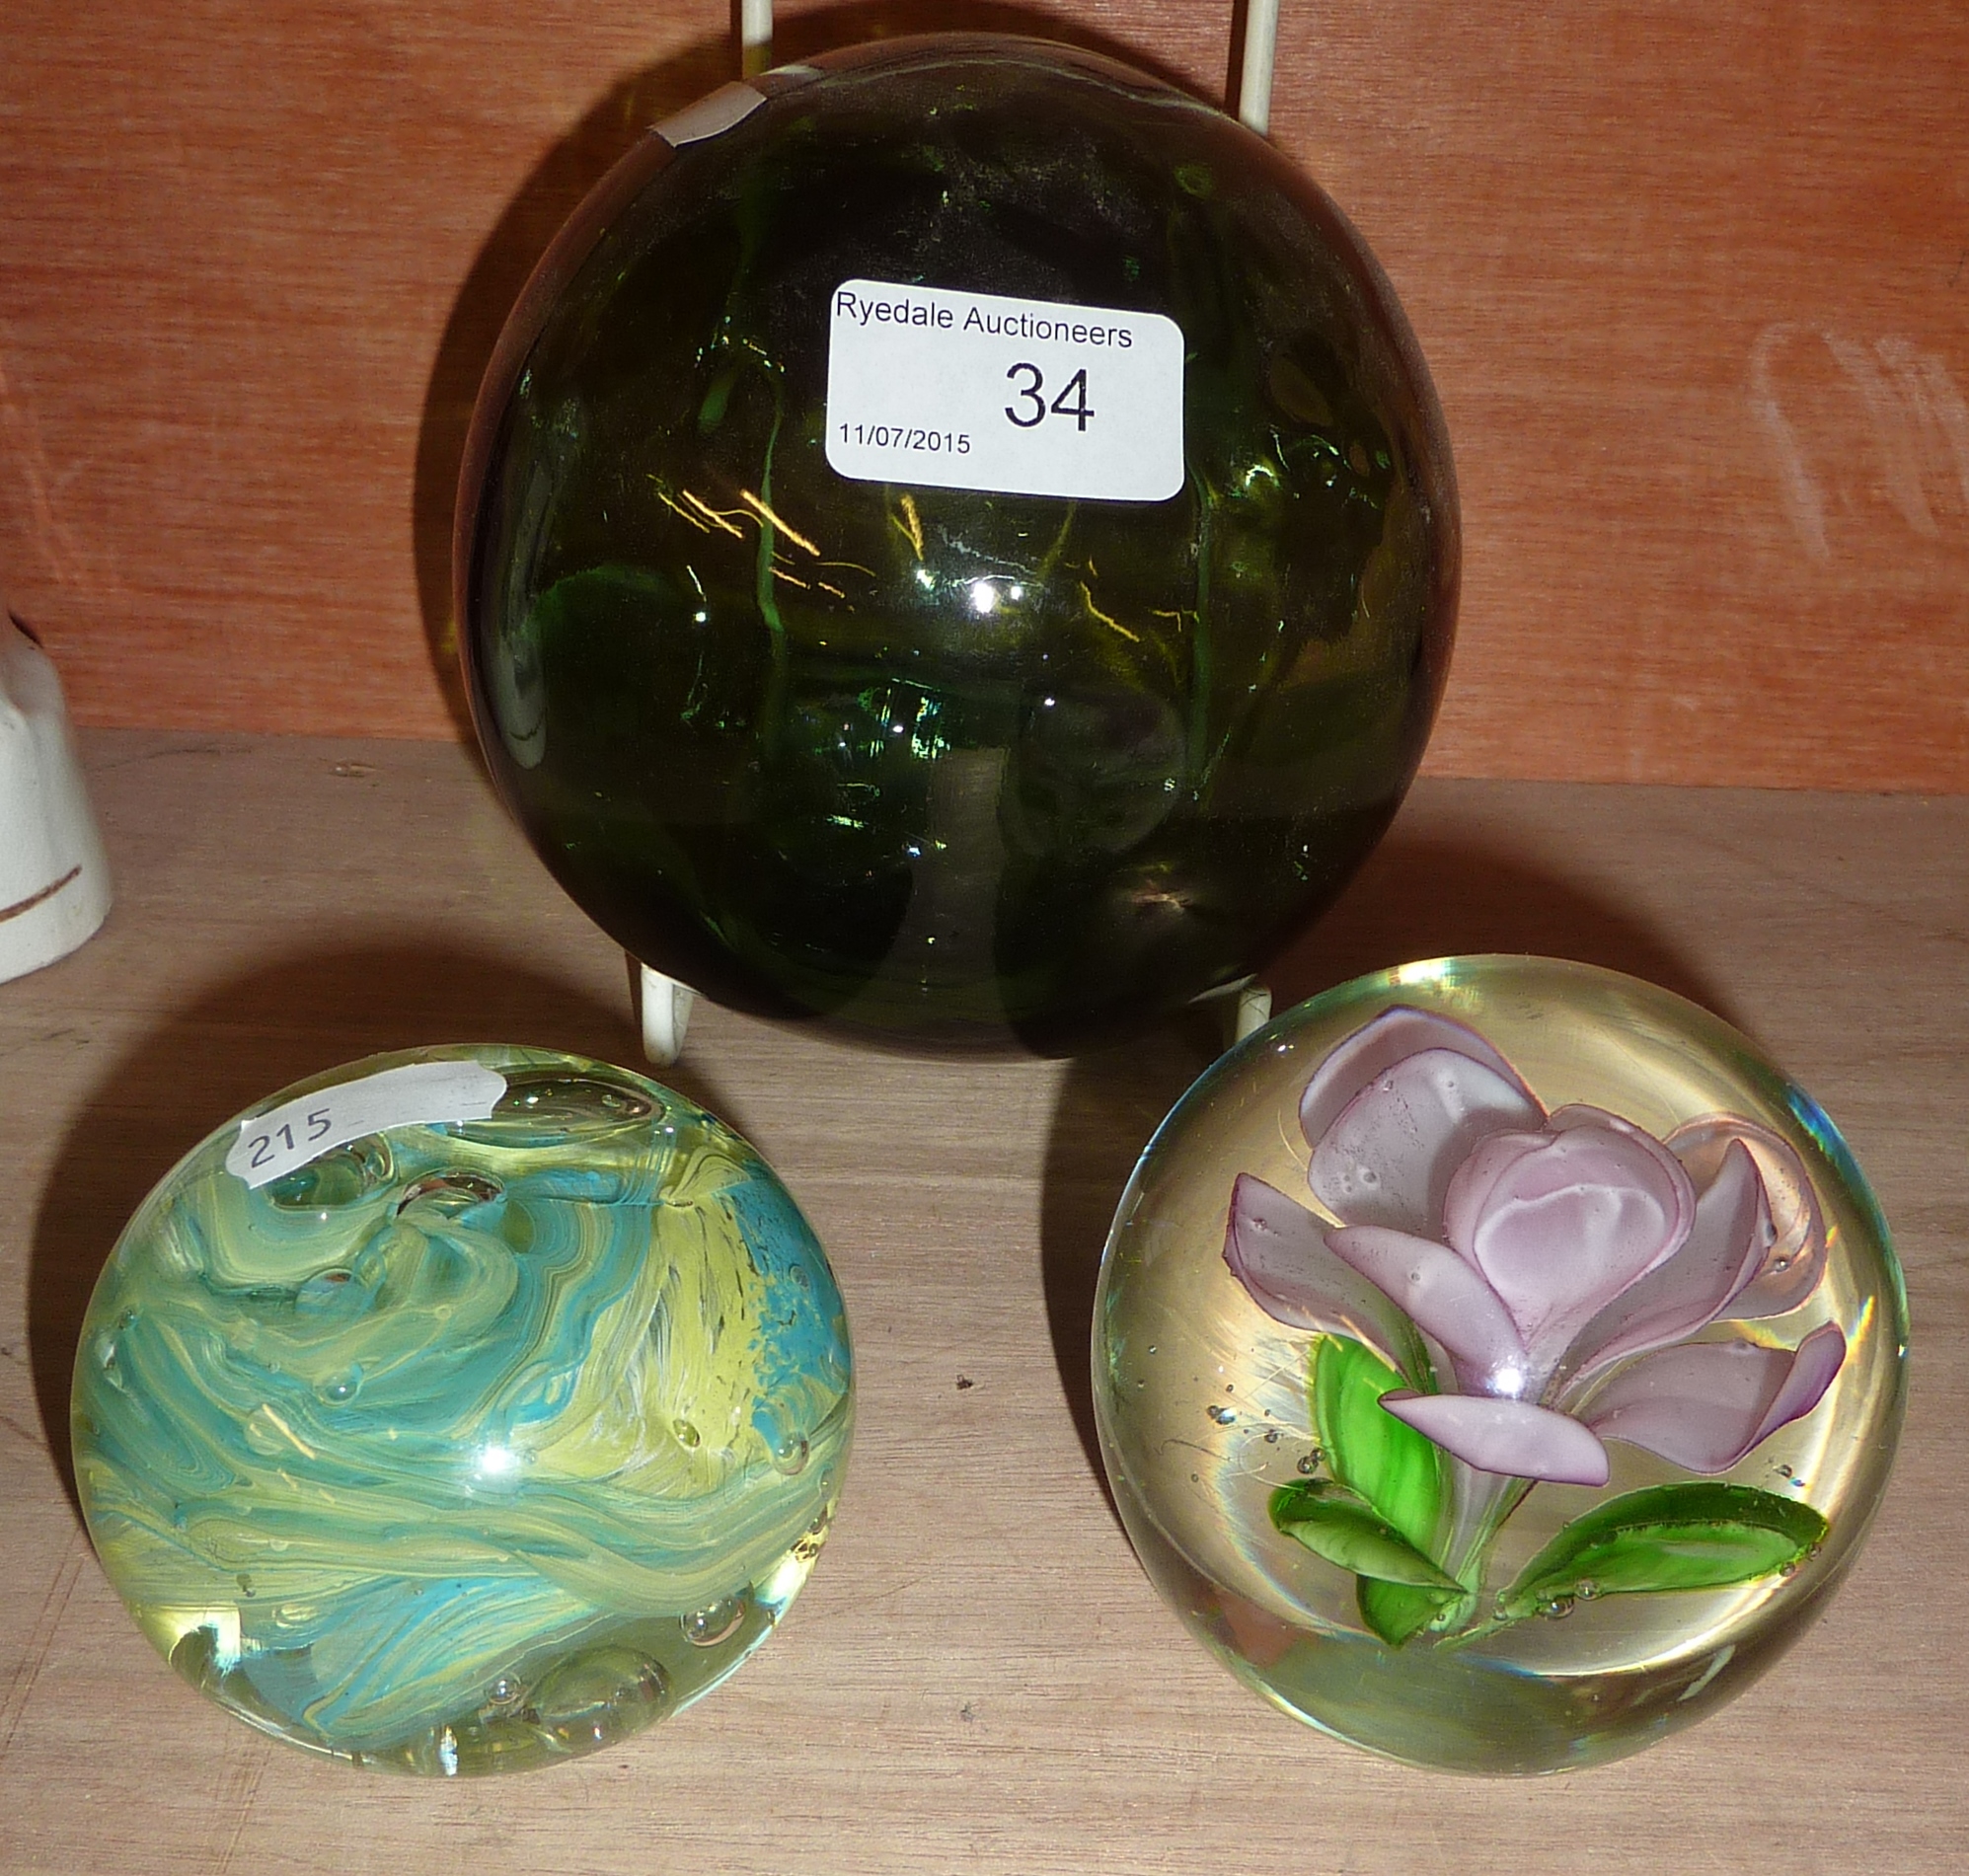 Mdina paperweight and 1 other and a glass witches ball